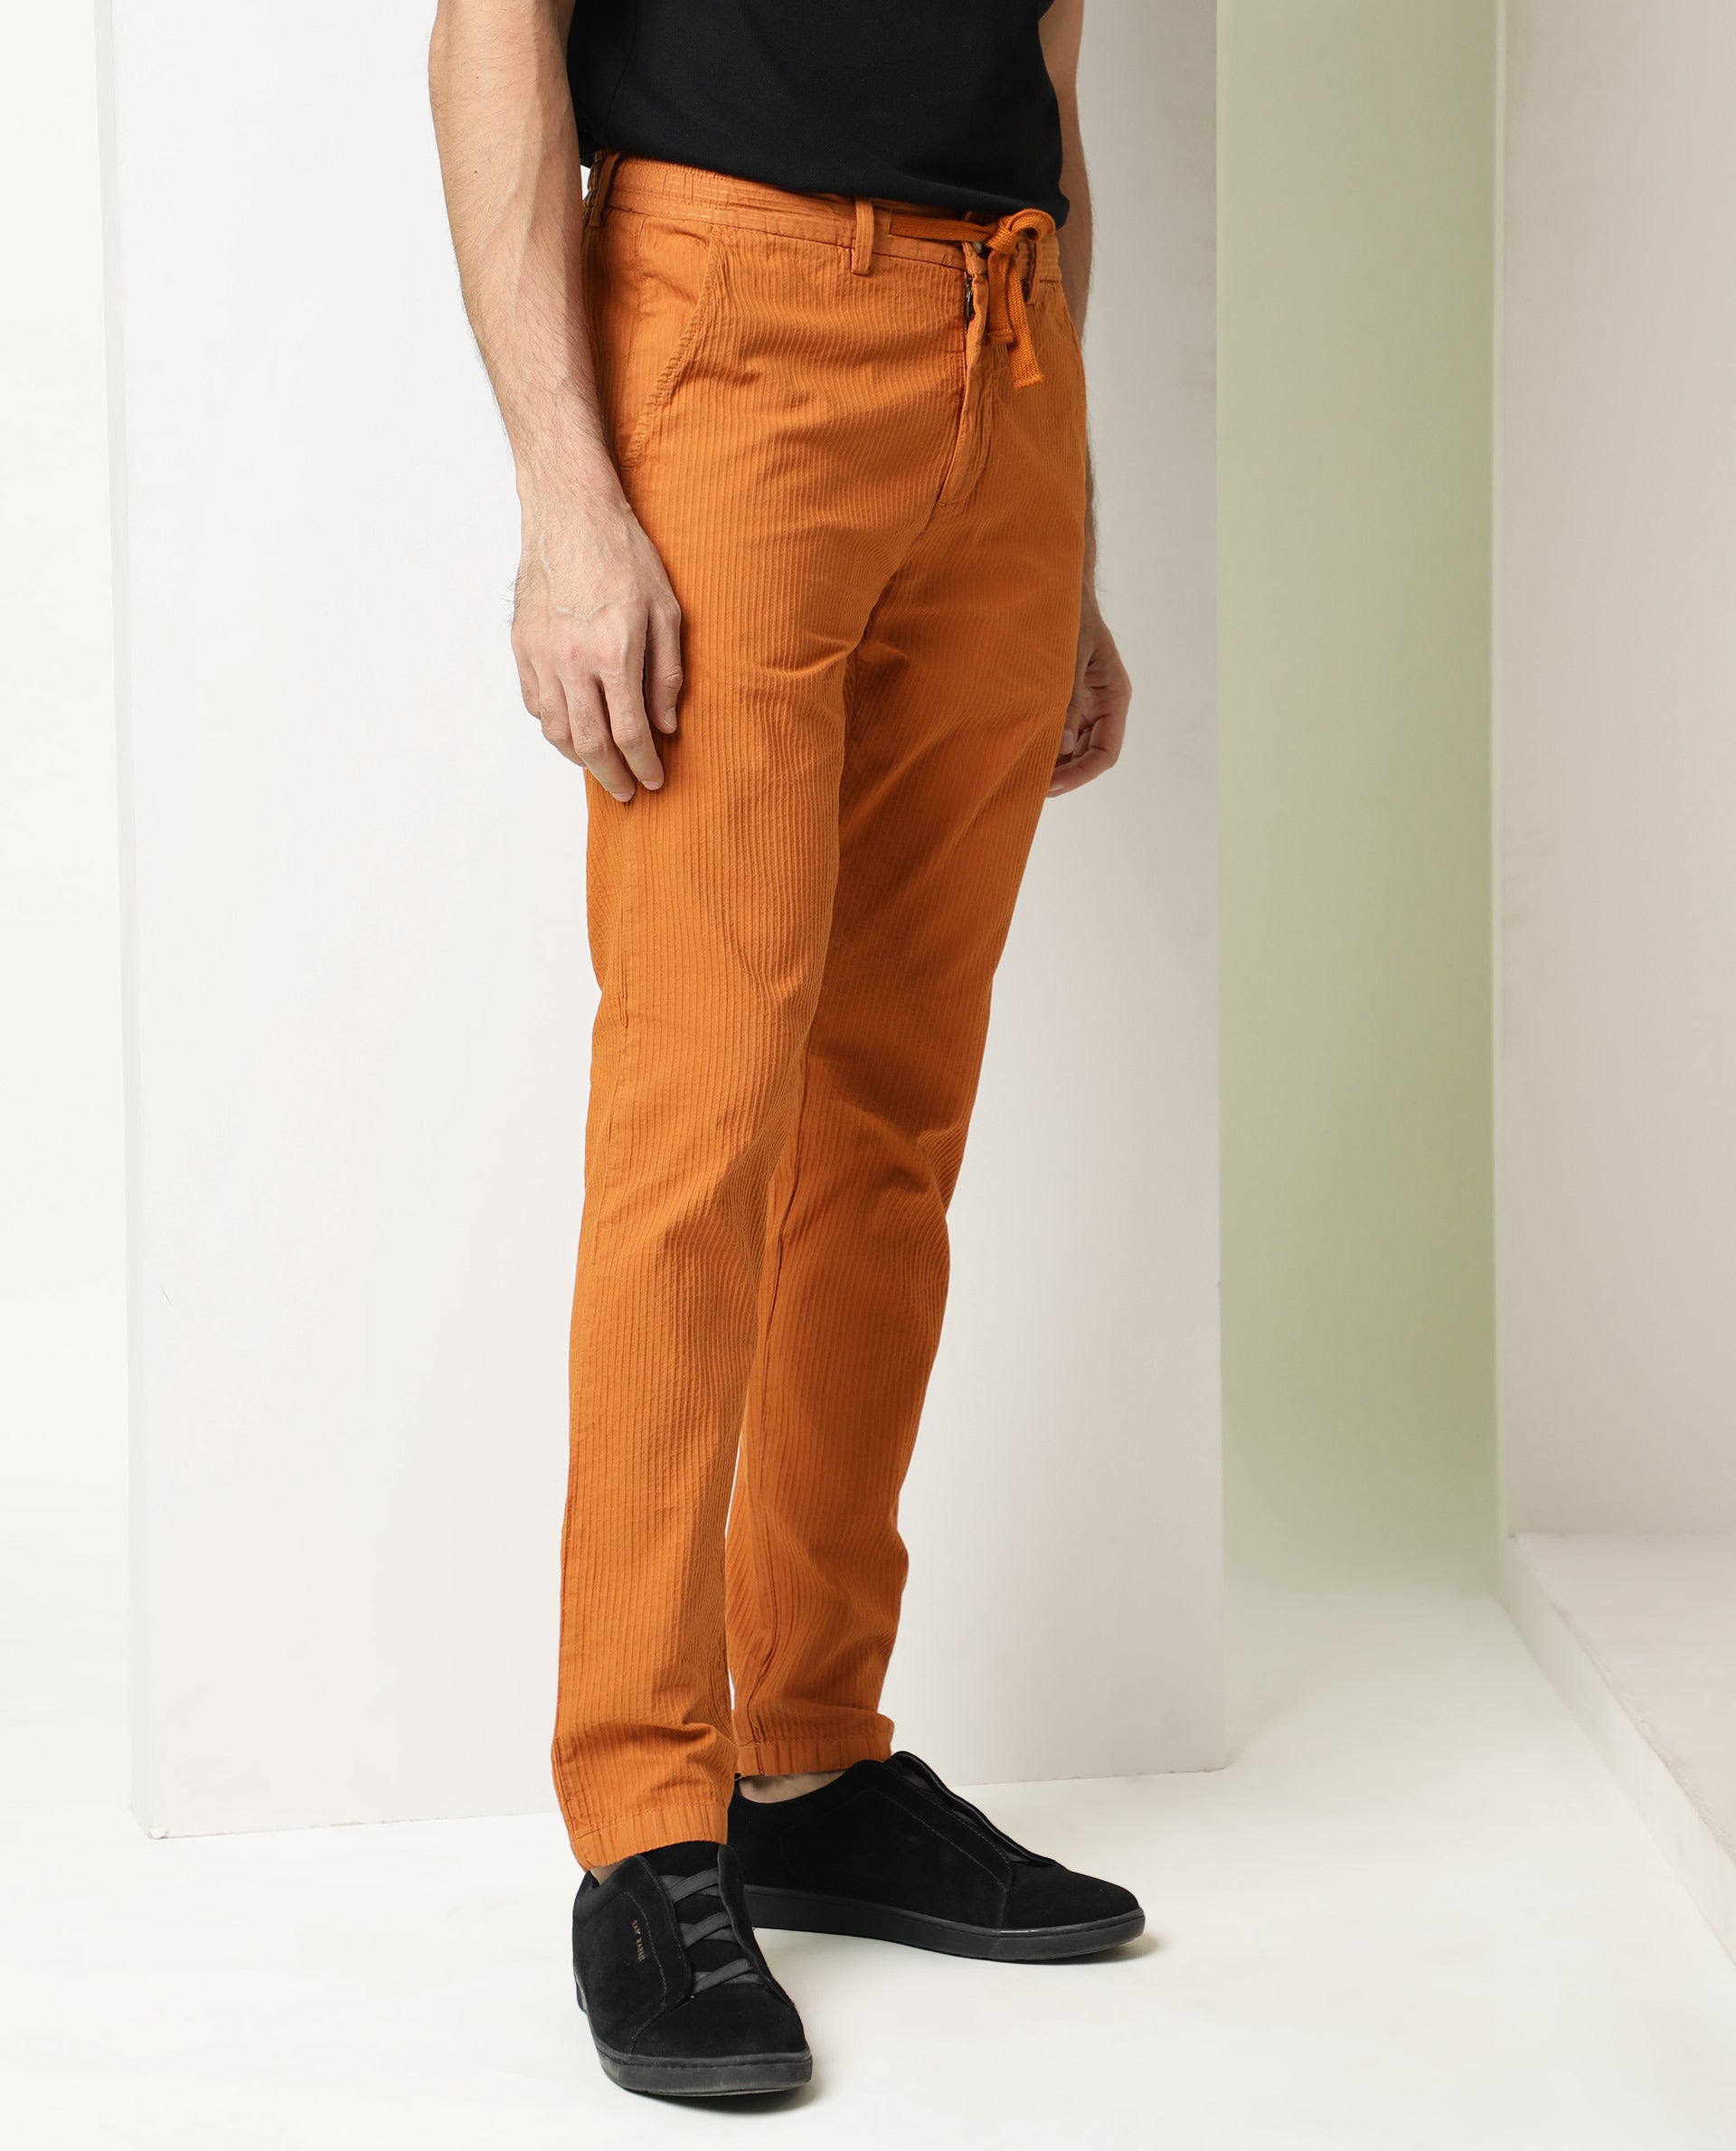 Orange Pants with Shoes Outfits For Men (236 ideas & outfits) | Lookastic